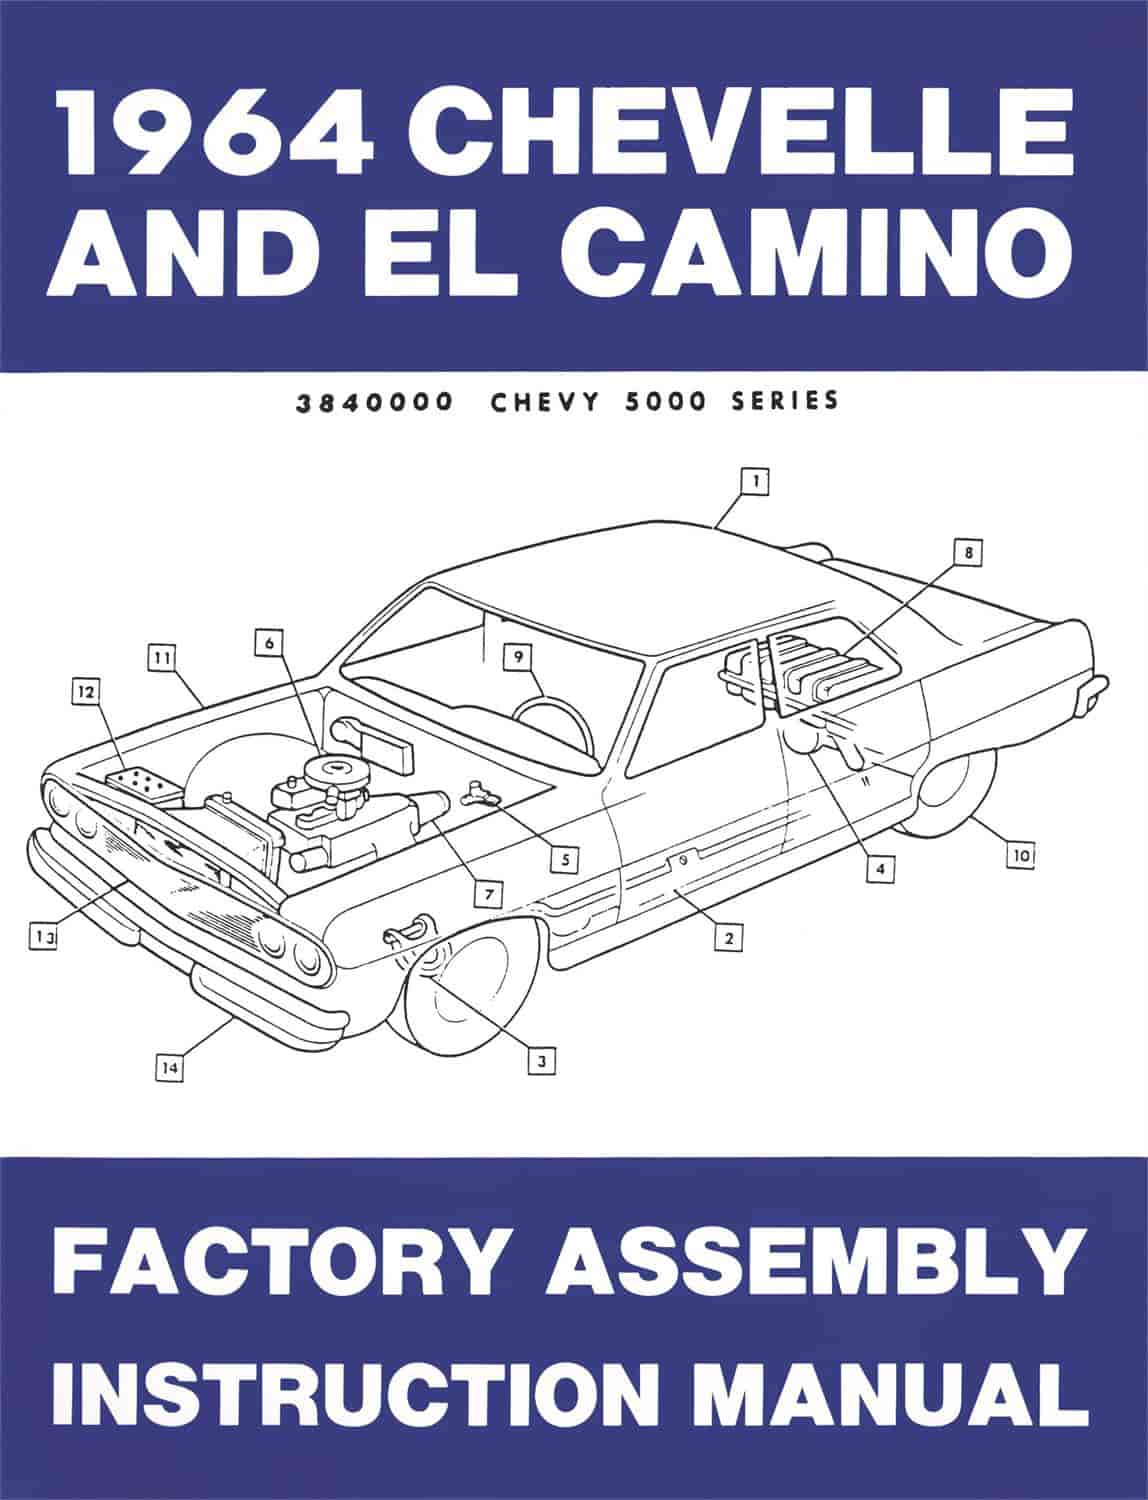 Factory Assembly Manual 1964 Chevy Chevelle & El Camino